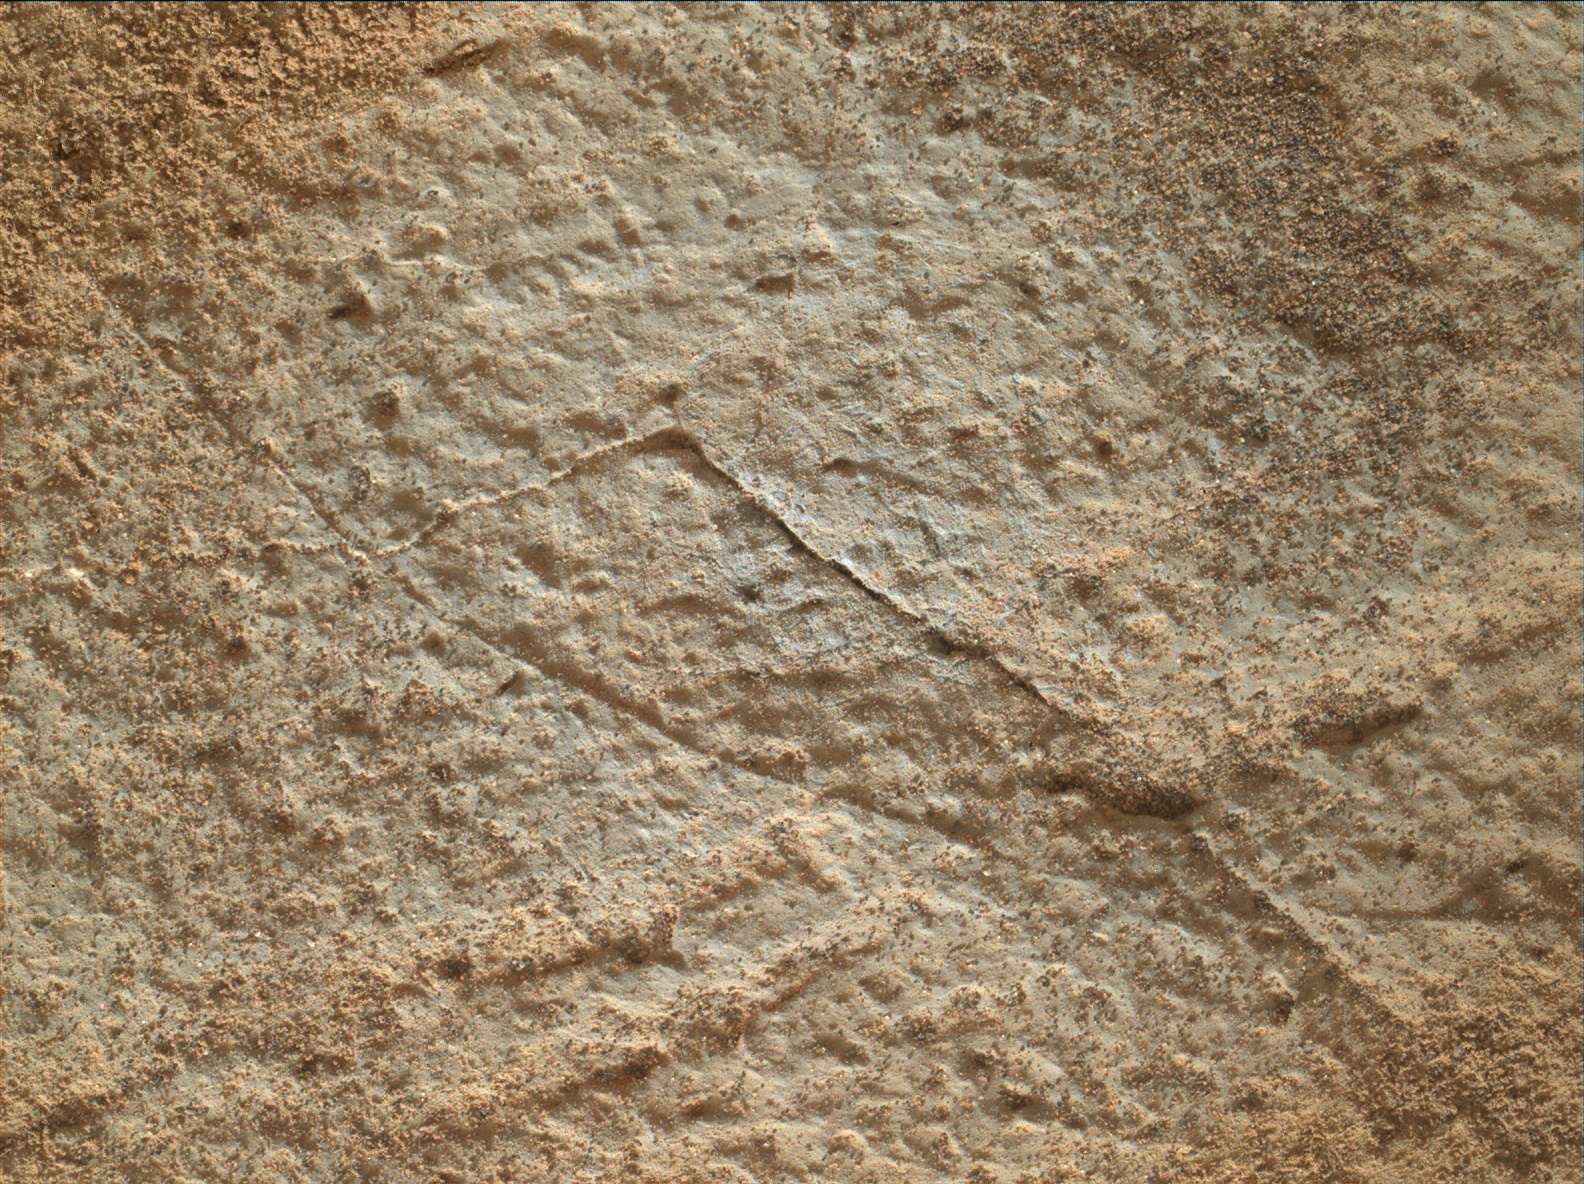 Nasa's Mars rover Curiosity acquired this image using its Mars Hand Lens Imager (MAHLI) on Sol 831